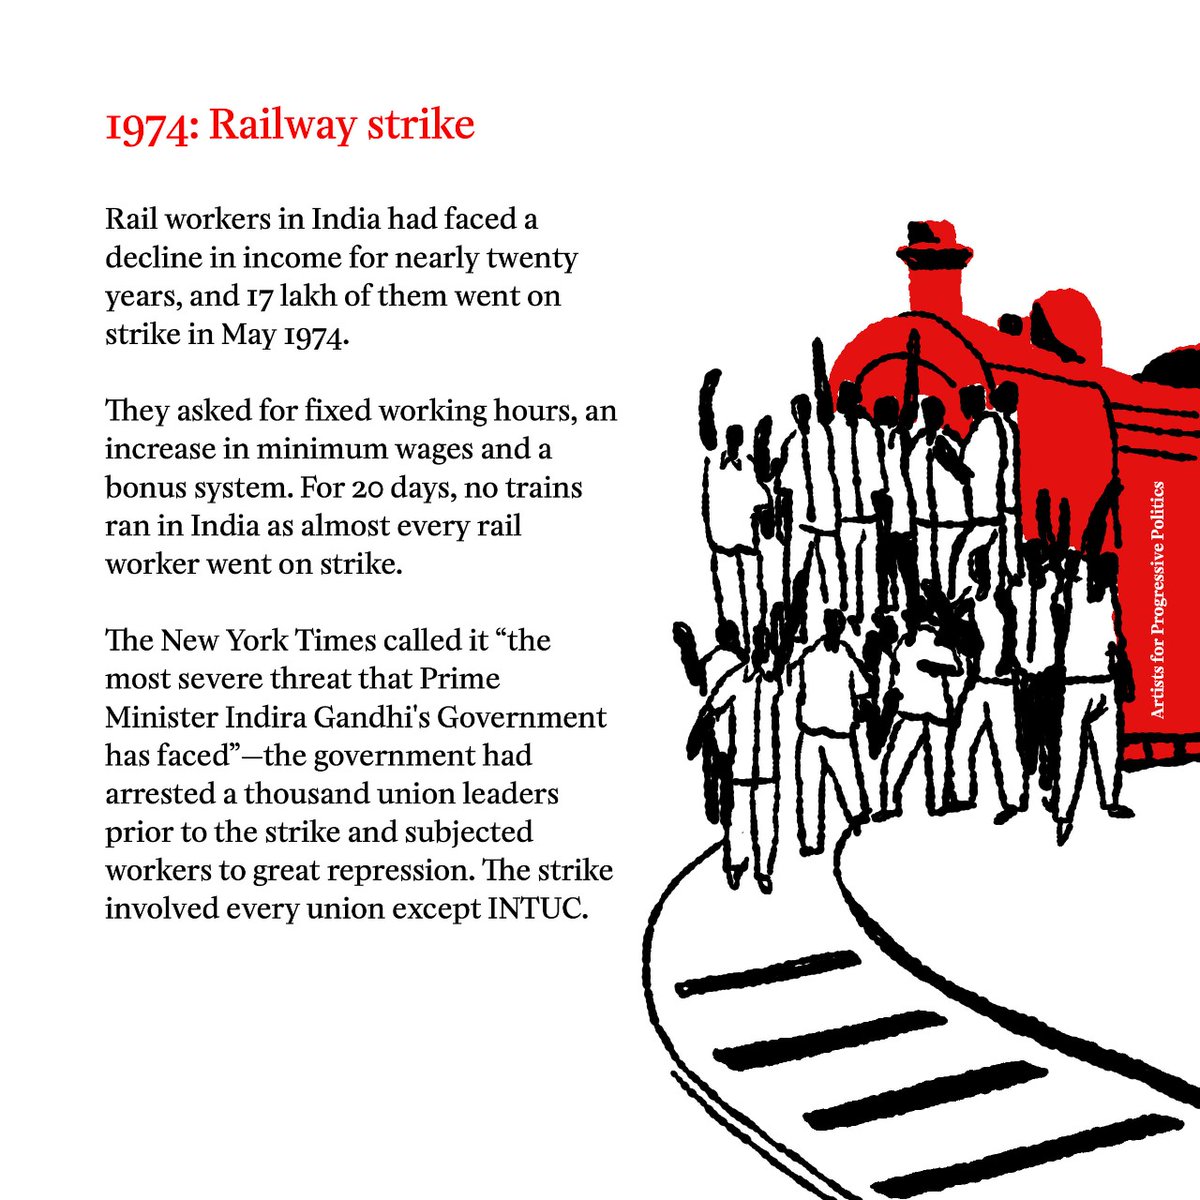 The Railway Strike brought the nation to a standstill and scared the Indira Gandhi government.  #LabourLaws (5/n)